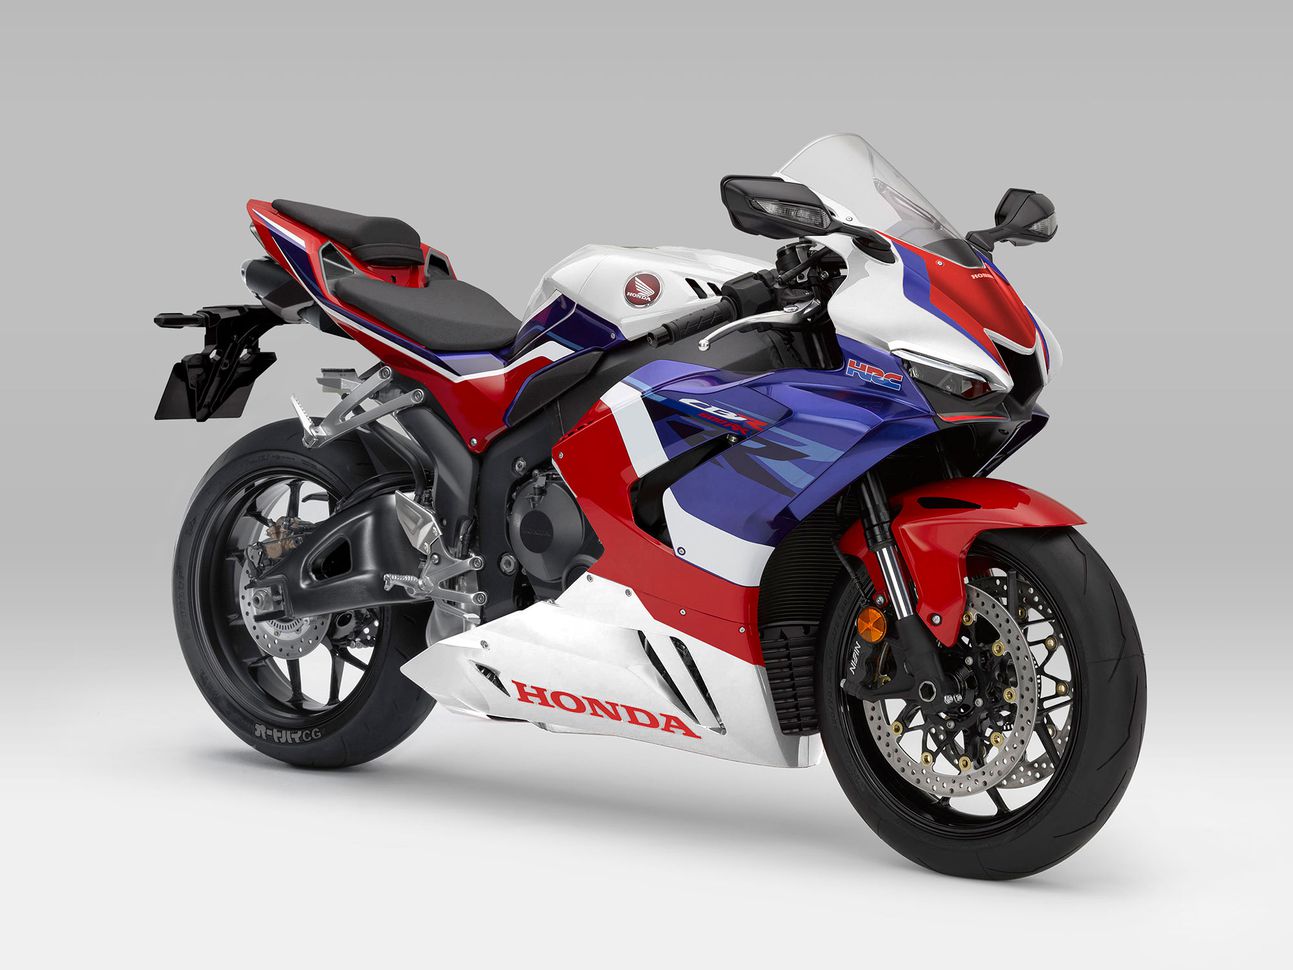 2021 Honda CBR600RR Buyers Guide Specs Photos Price  Cycle World